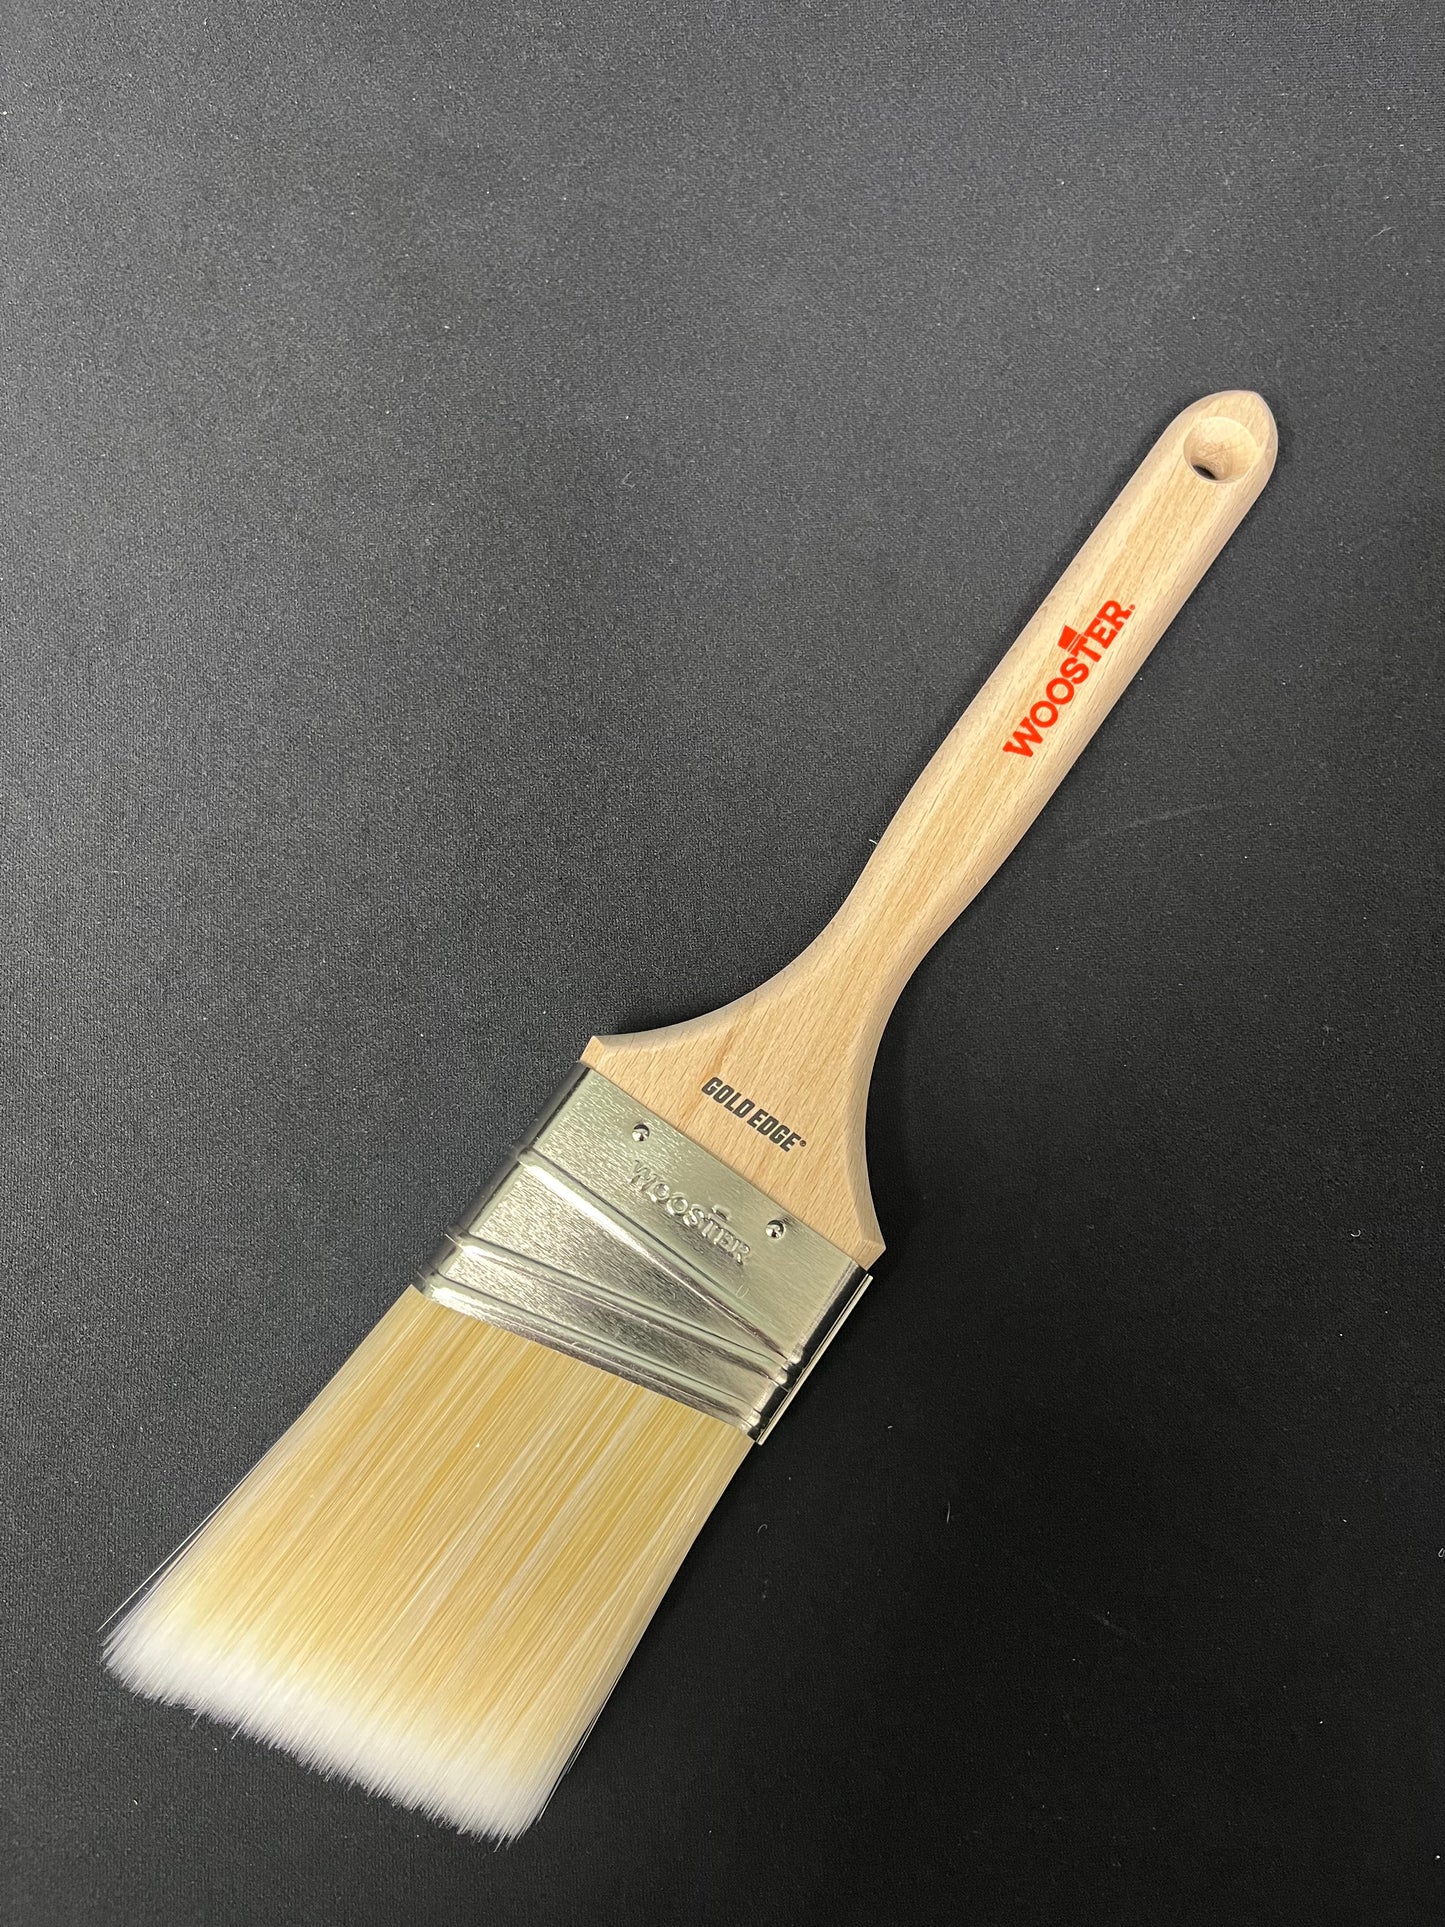 Wooster Gold Edge Brushes